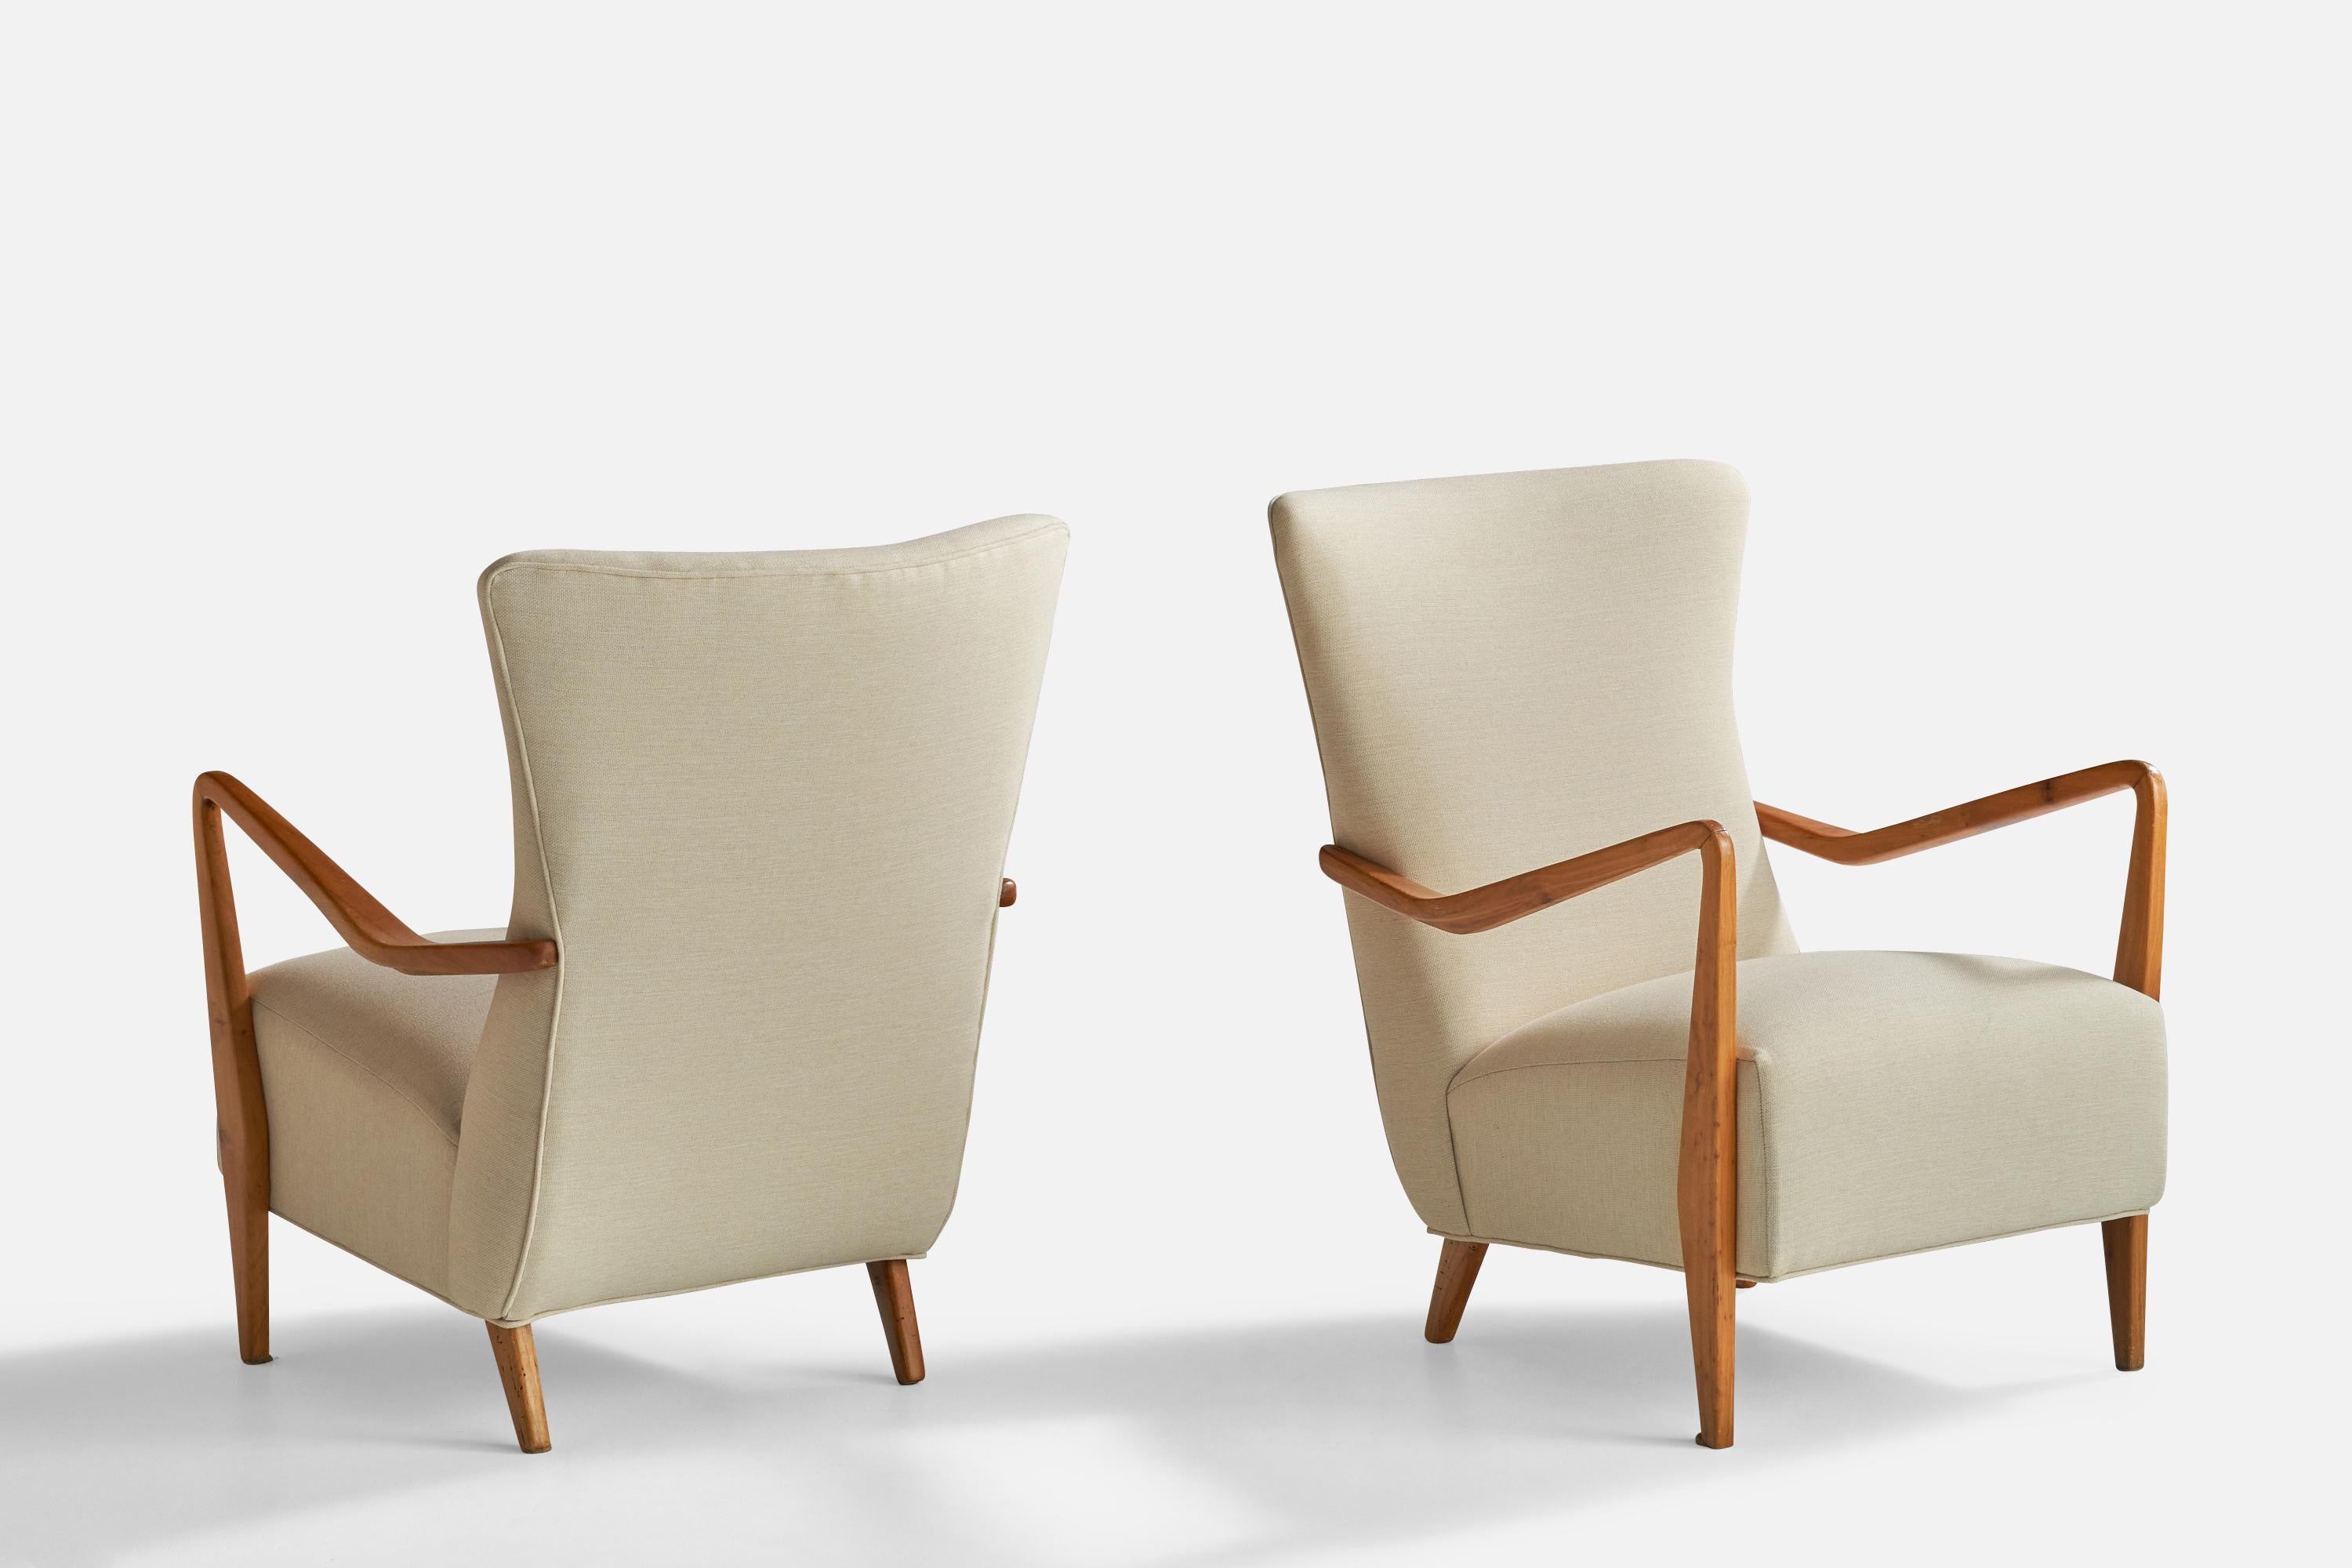 A pair of walnut and white fabric lounge chairs designed and produced in Italy, 1950s.

Seat height 15